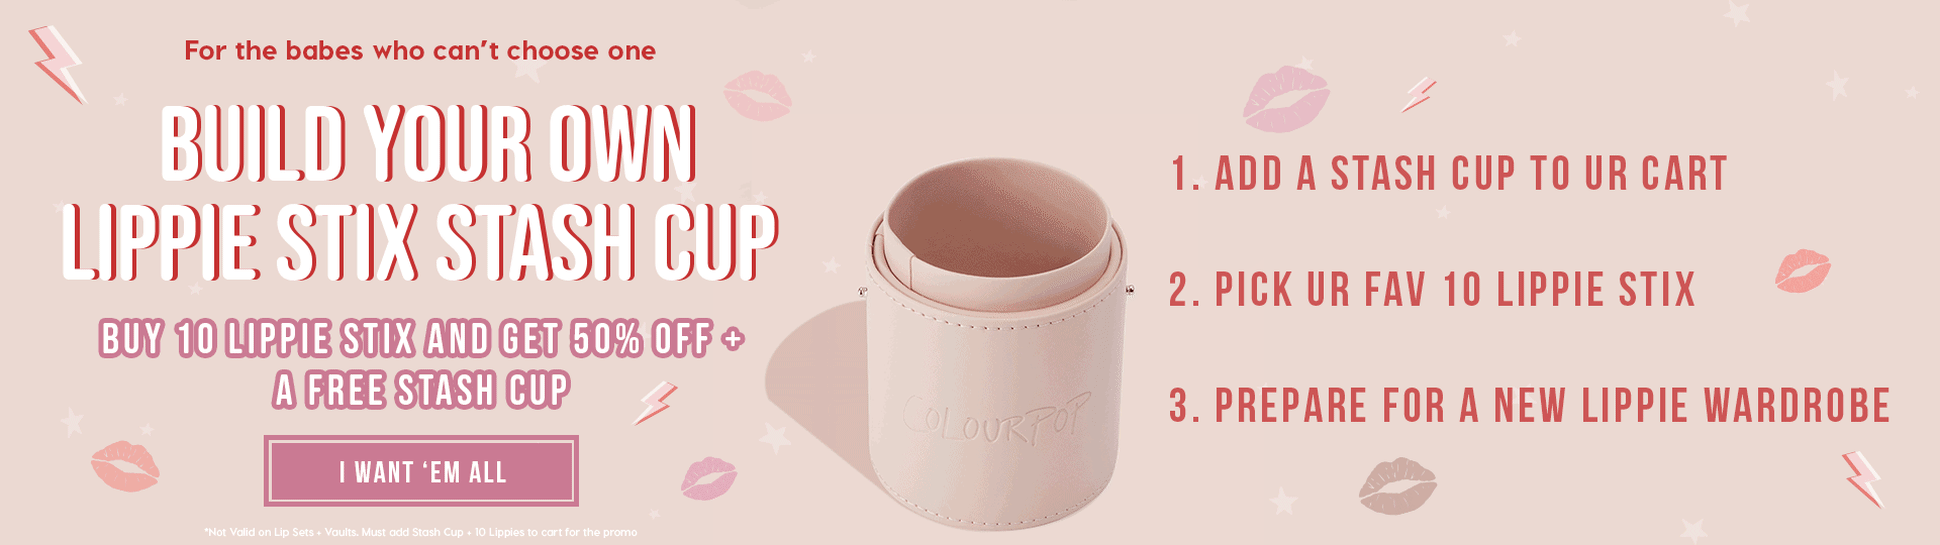 For the babes who can't choose one, Build Your Own Lippie Stix Stash Cup! Buy 10 Lippie Stix and get 50% off + a free stash cup!
1. Add a stash cup to ur cart. 
2. Pick ur fav 10 Lippie Stix
3. Prepare for a New Lippie Wardrobe

I want 'em all!